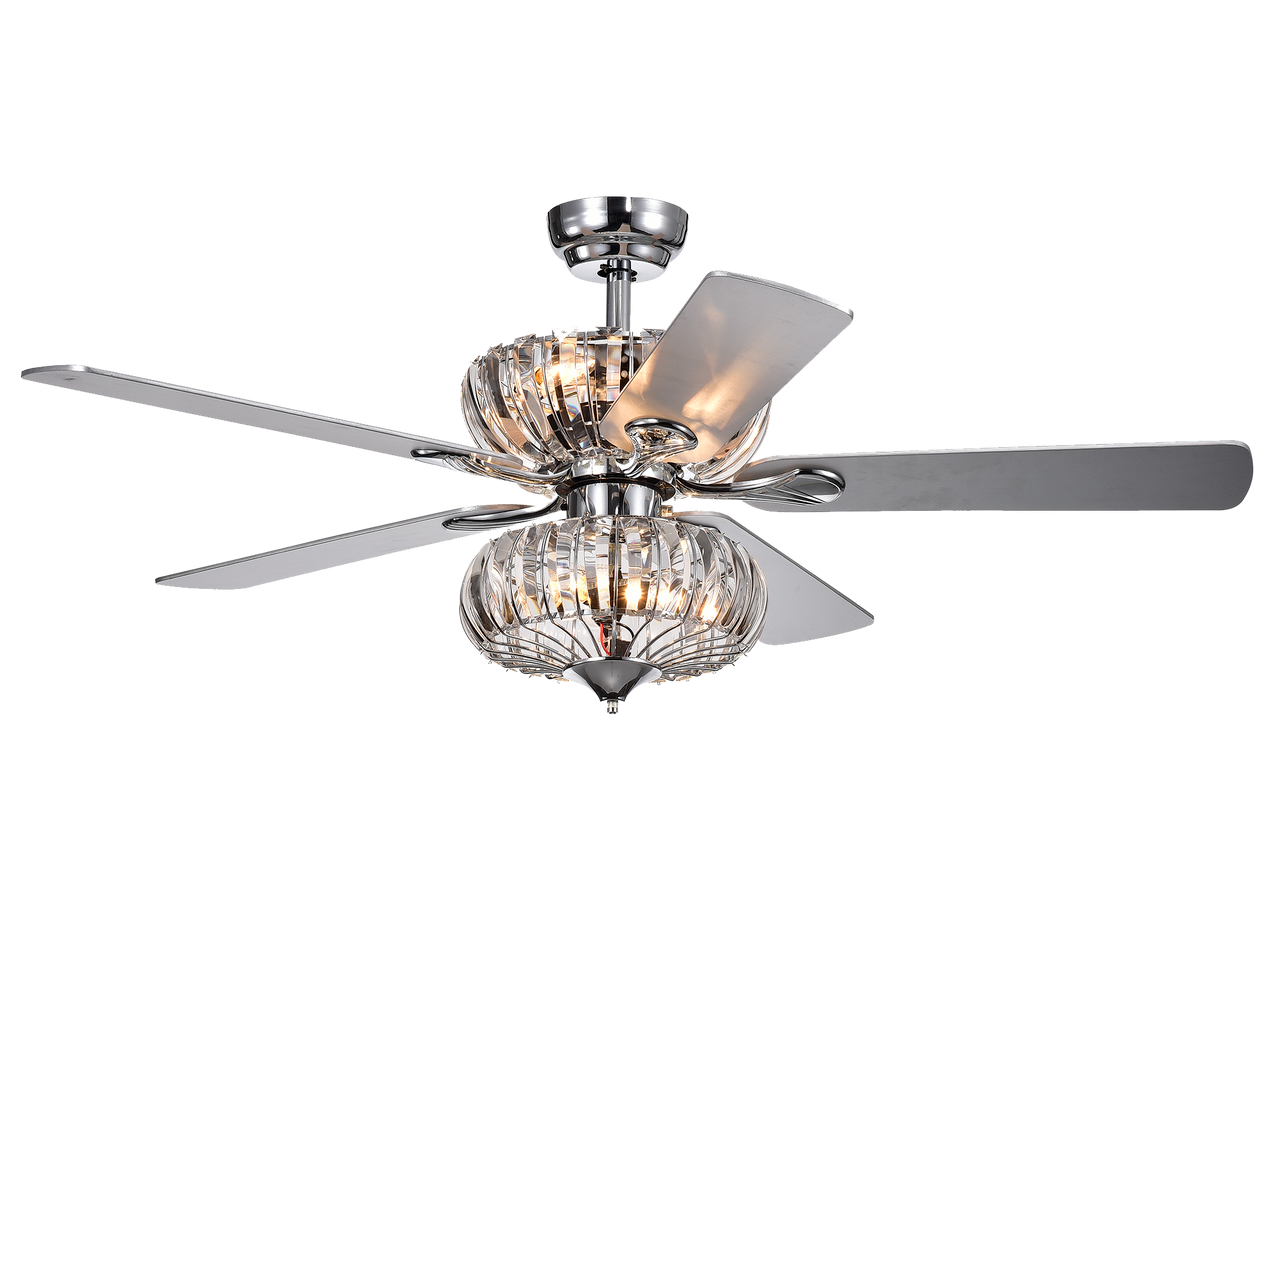 WAREHOUSE OF TIFFANY'S CFL-8315REMO/CH Kyana 52 in. 6-Light Indoor Chrome Finish Remote Controlled Ceiling Fan with Light Kit